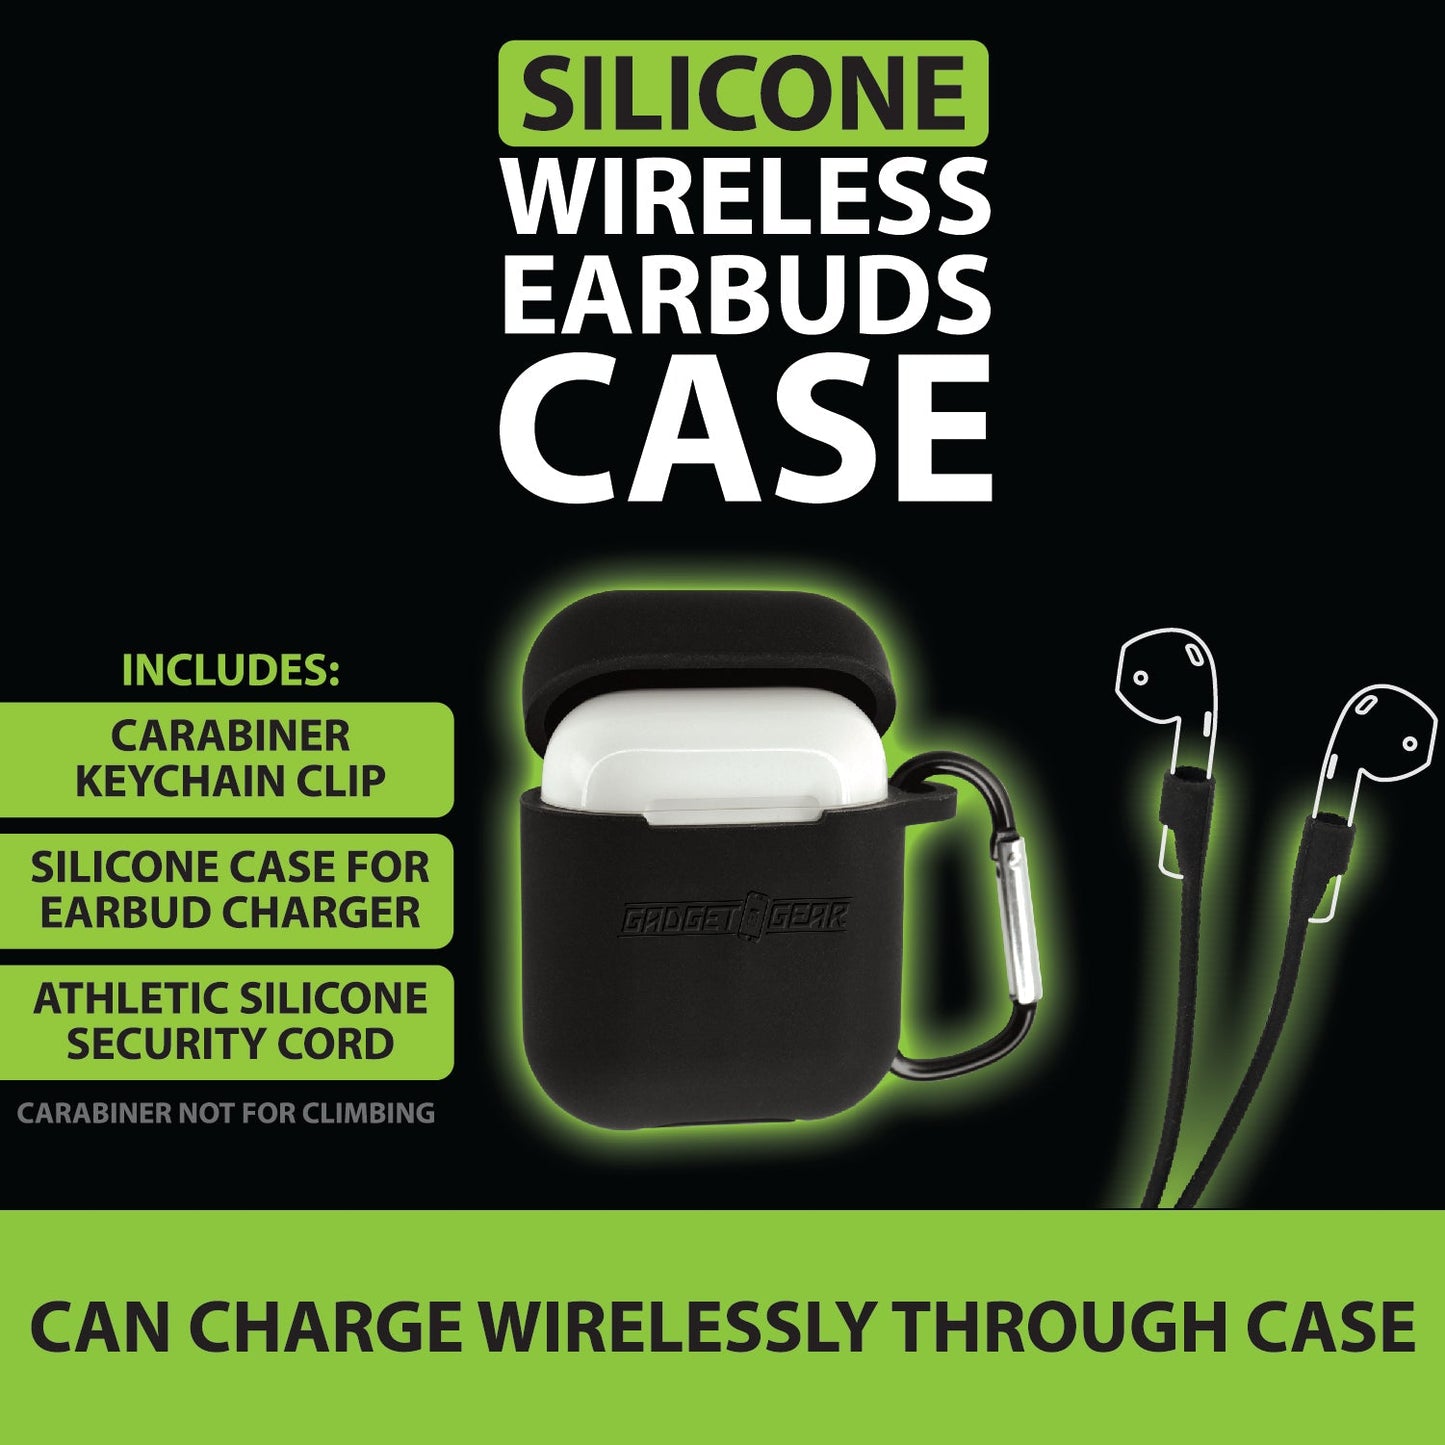 ITEM NUMBER 025032 SILICONE EARBUD CASE 8 PIECES PER DISPLAY